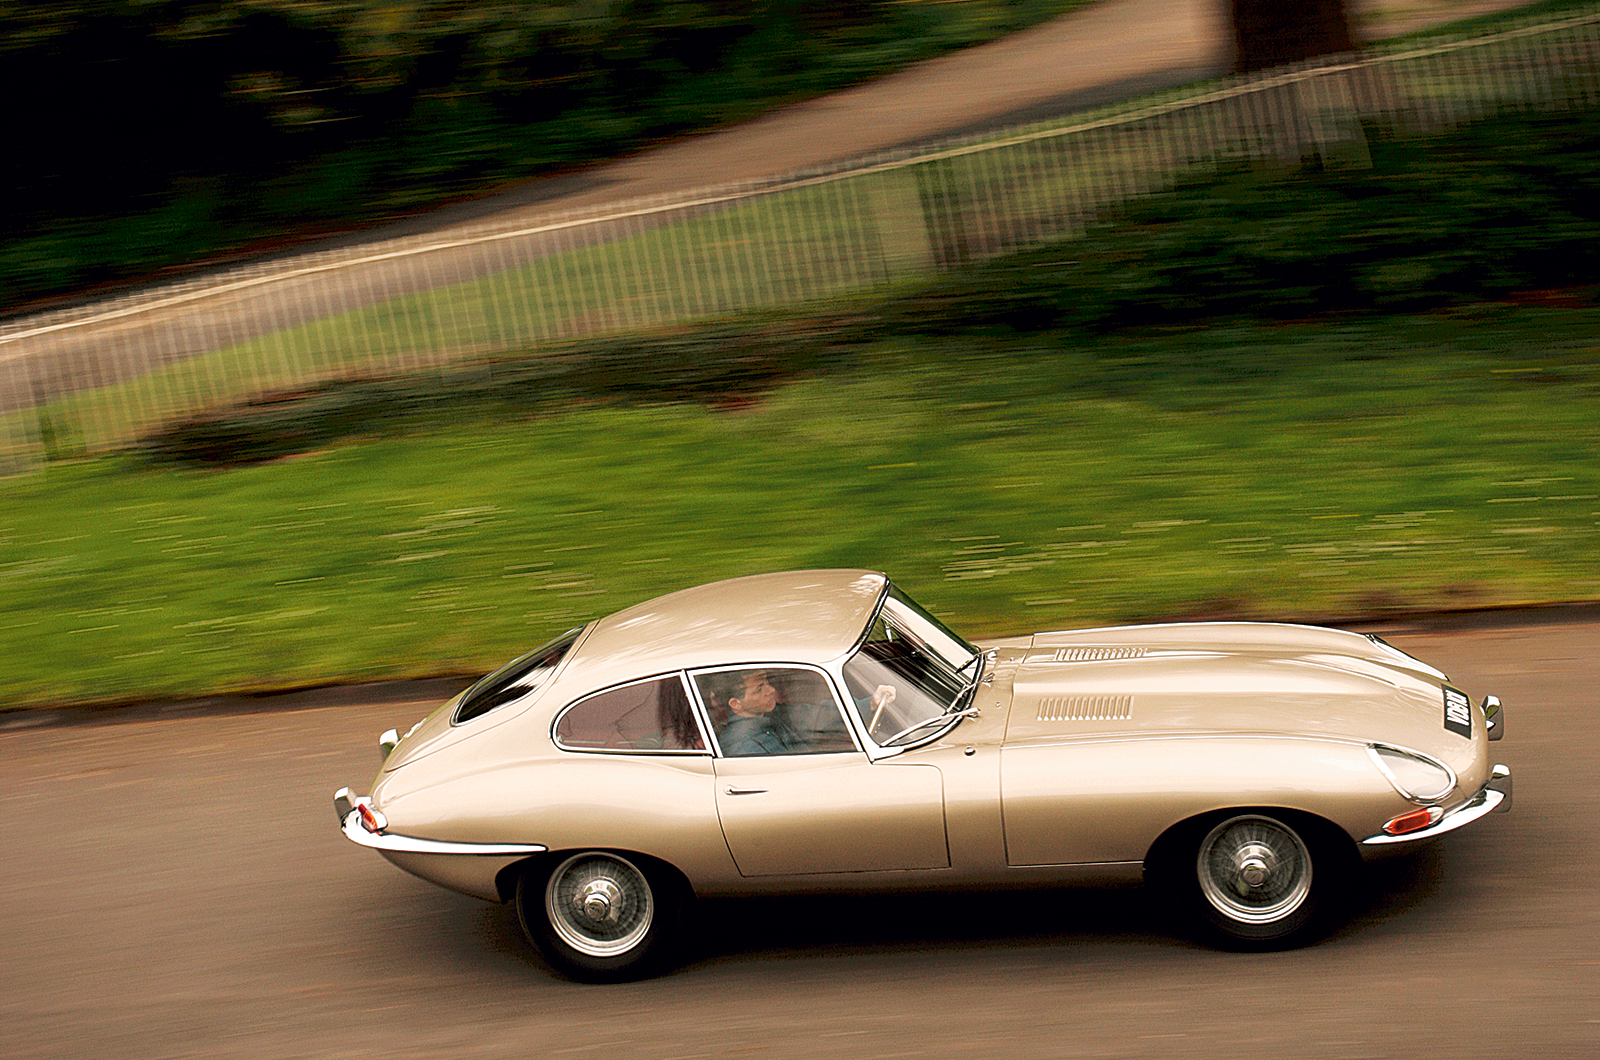 Classic & Sports Car – Everyone wants a Jaguar E-type, but which one is best?